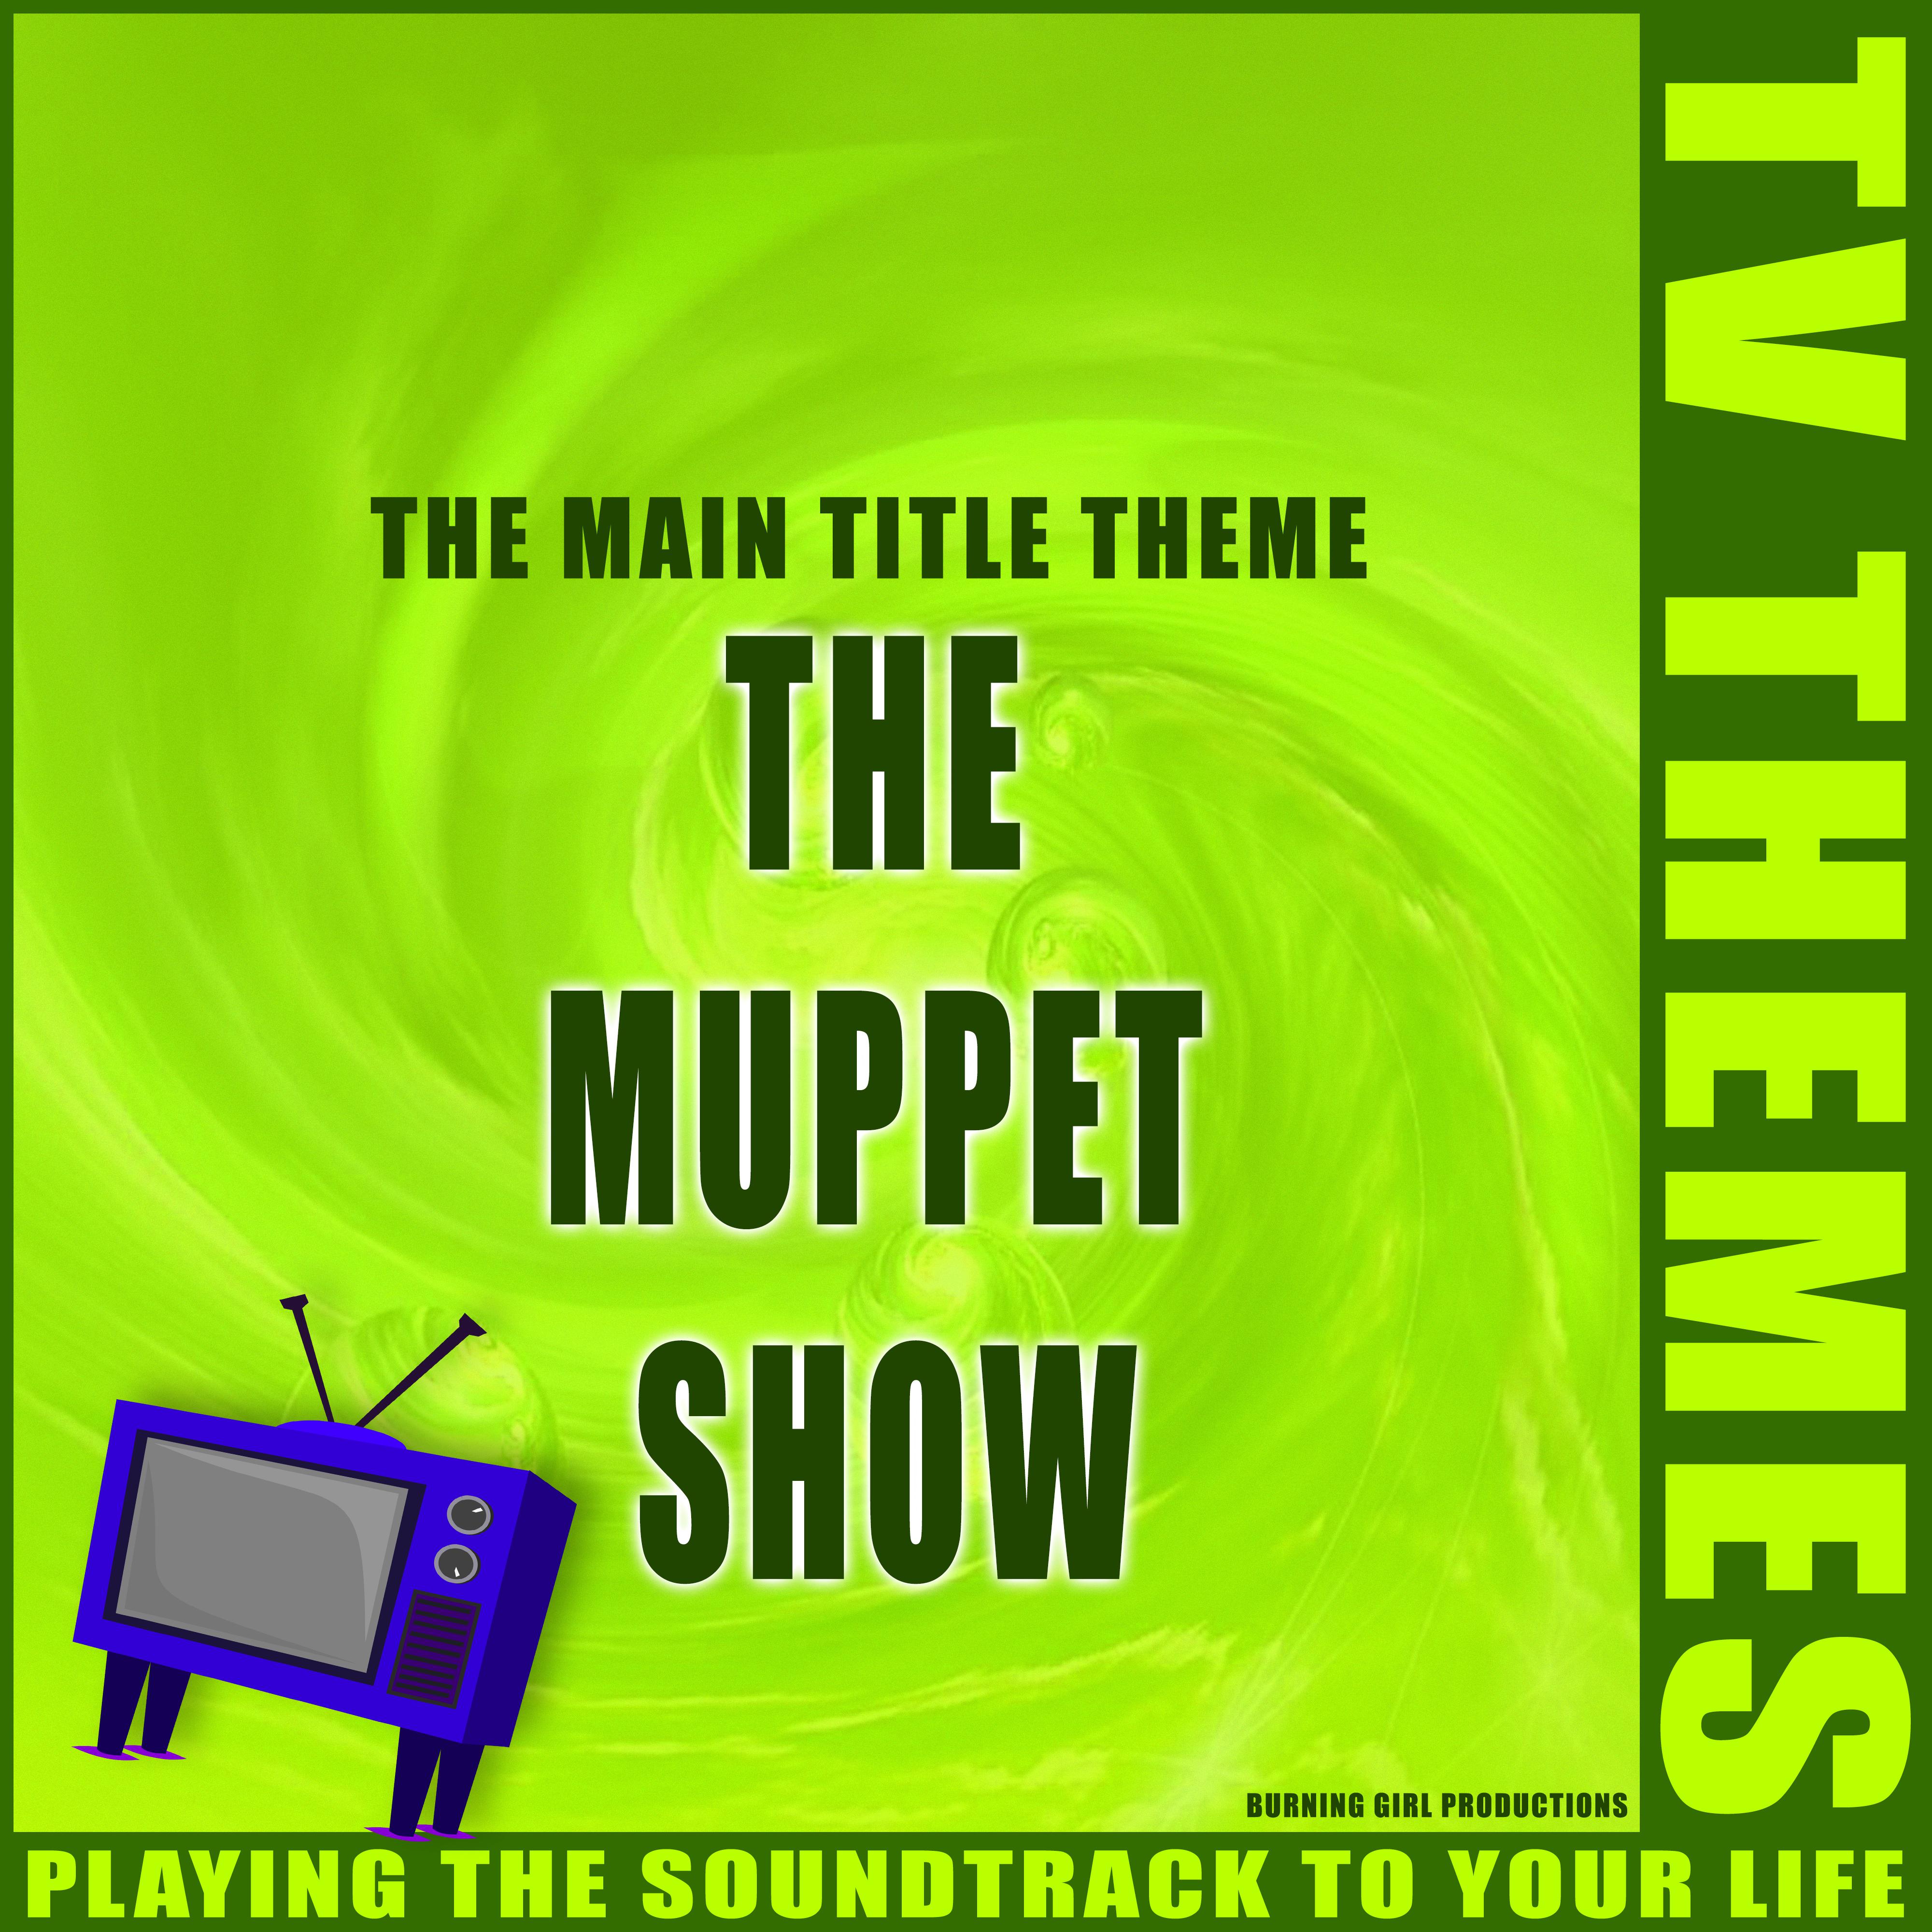 The Main Title Theme - The Muppet Show